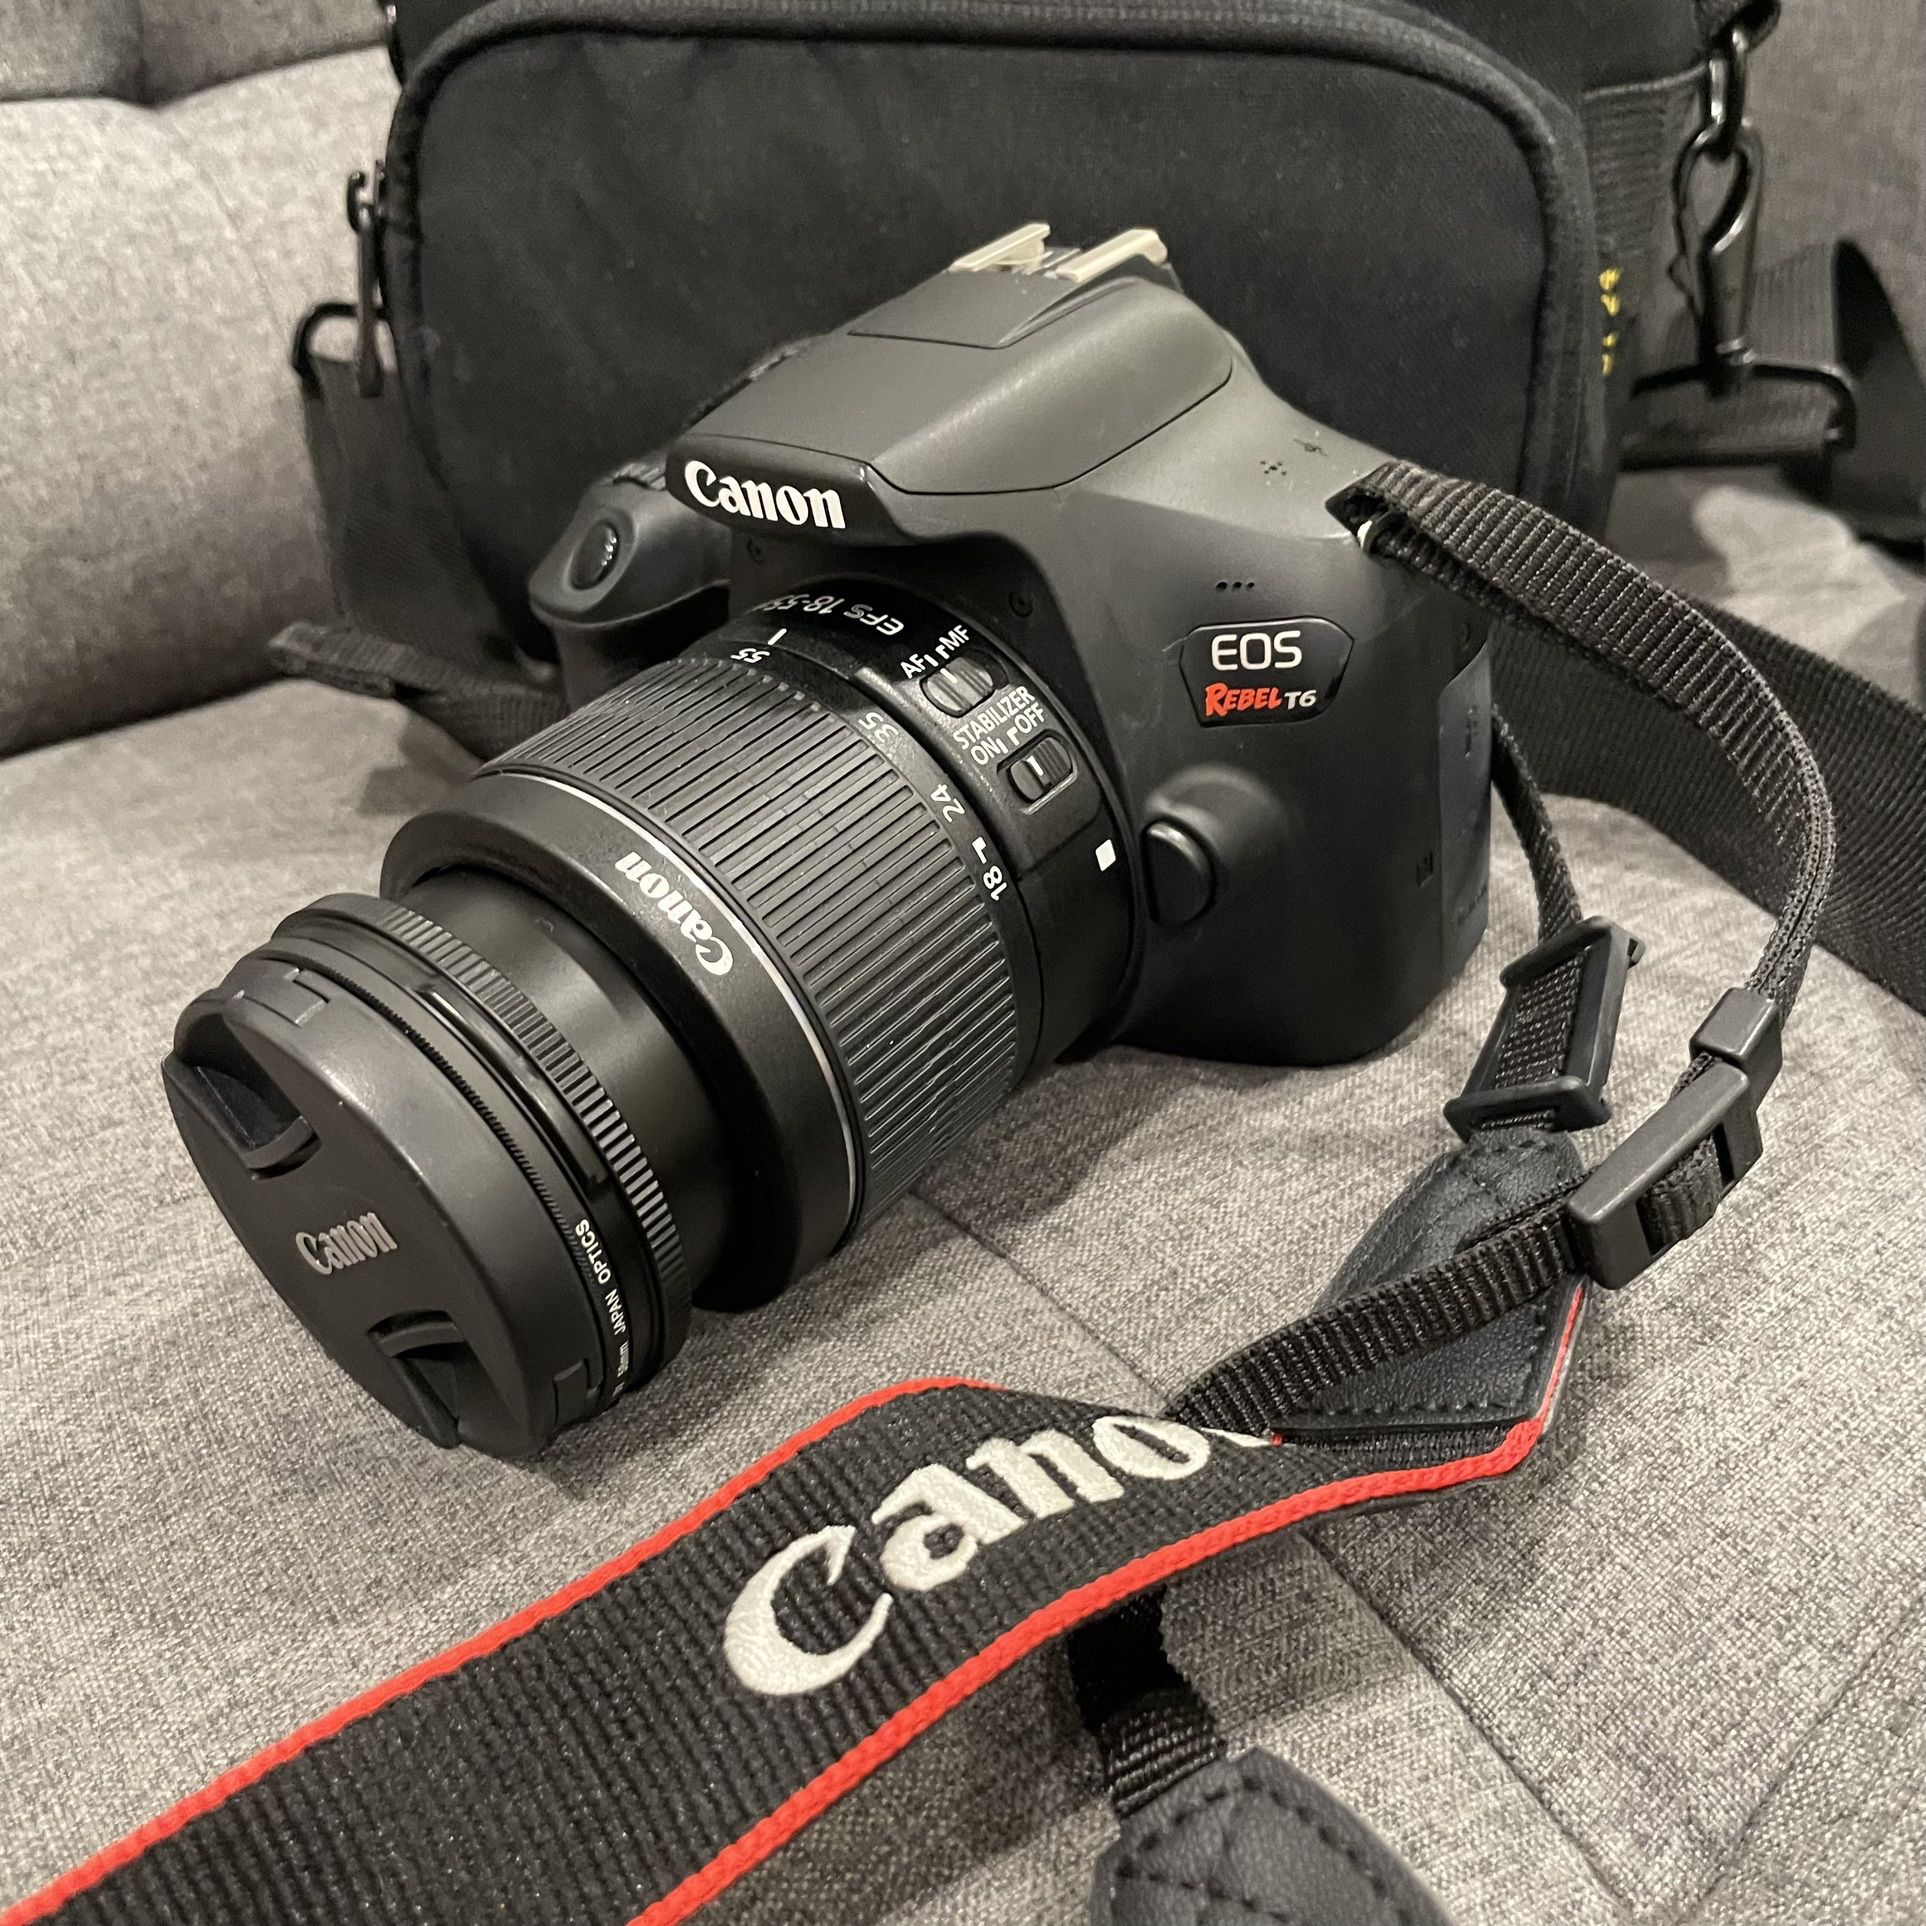 Canon EOS rebel T6 DSLR Camera With 18-55mm lens